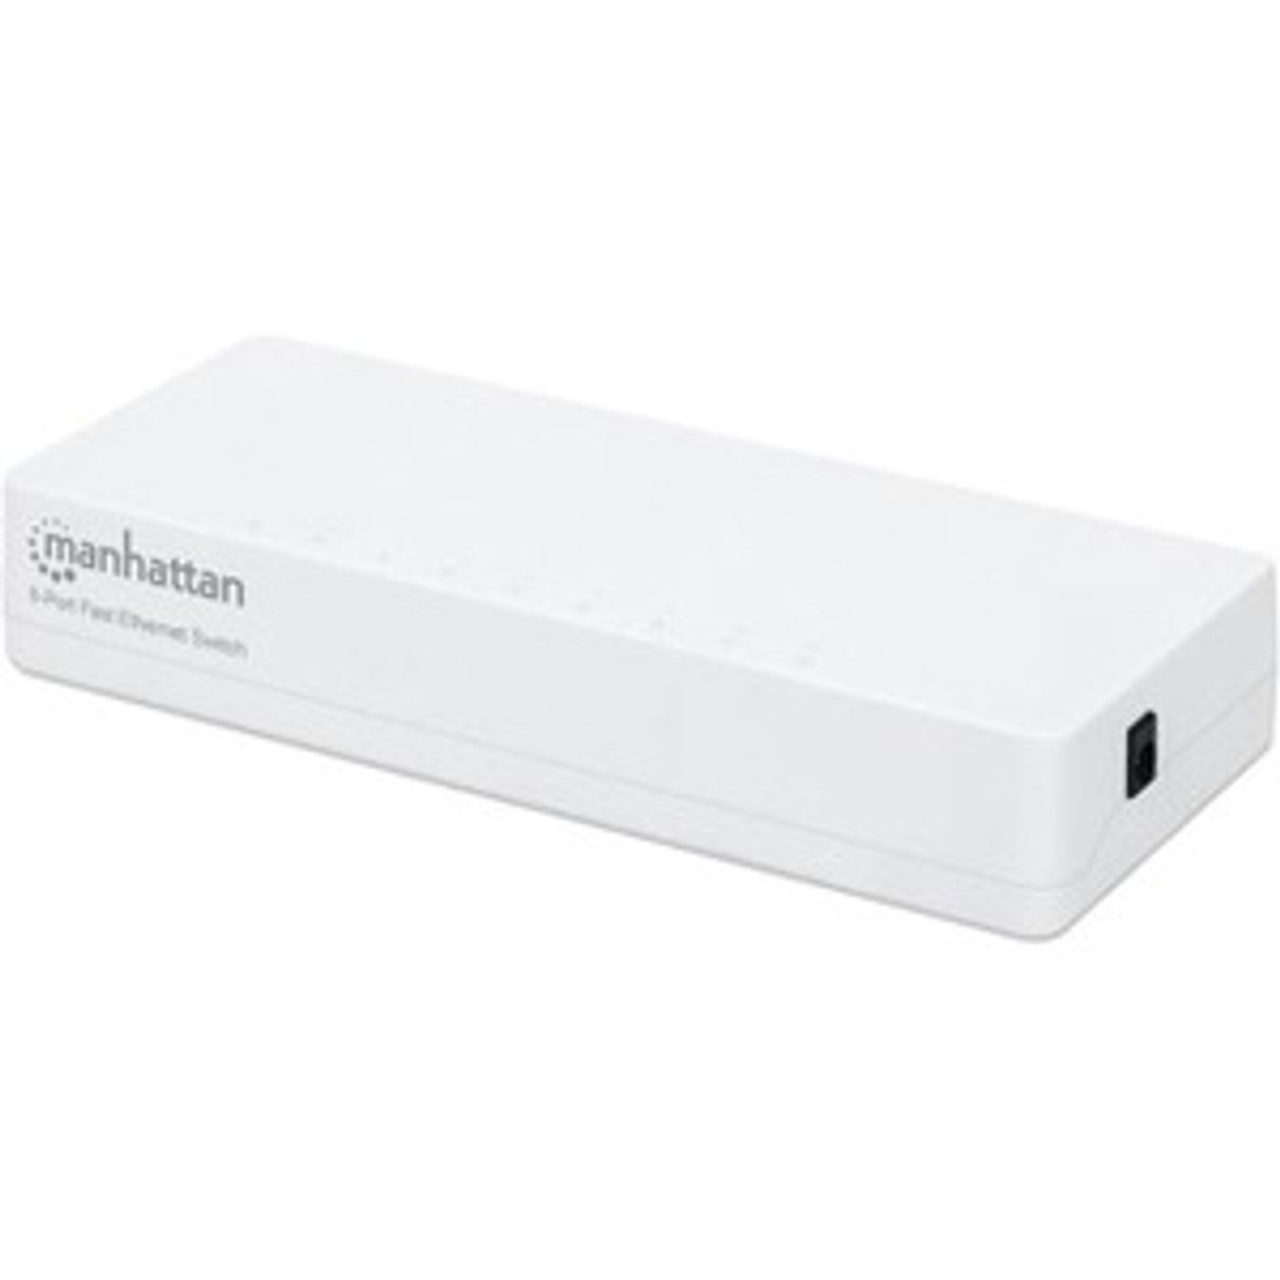 560689 Manhattan 8-Port 10/100 Desktop Switch, Plastic Housing - Supports any combination of 10 Mbps or 100 Mbps network  (Refurbished)